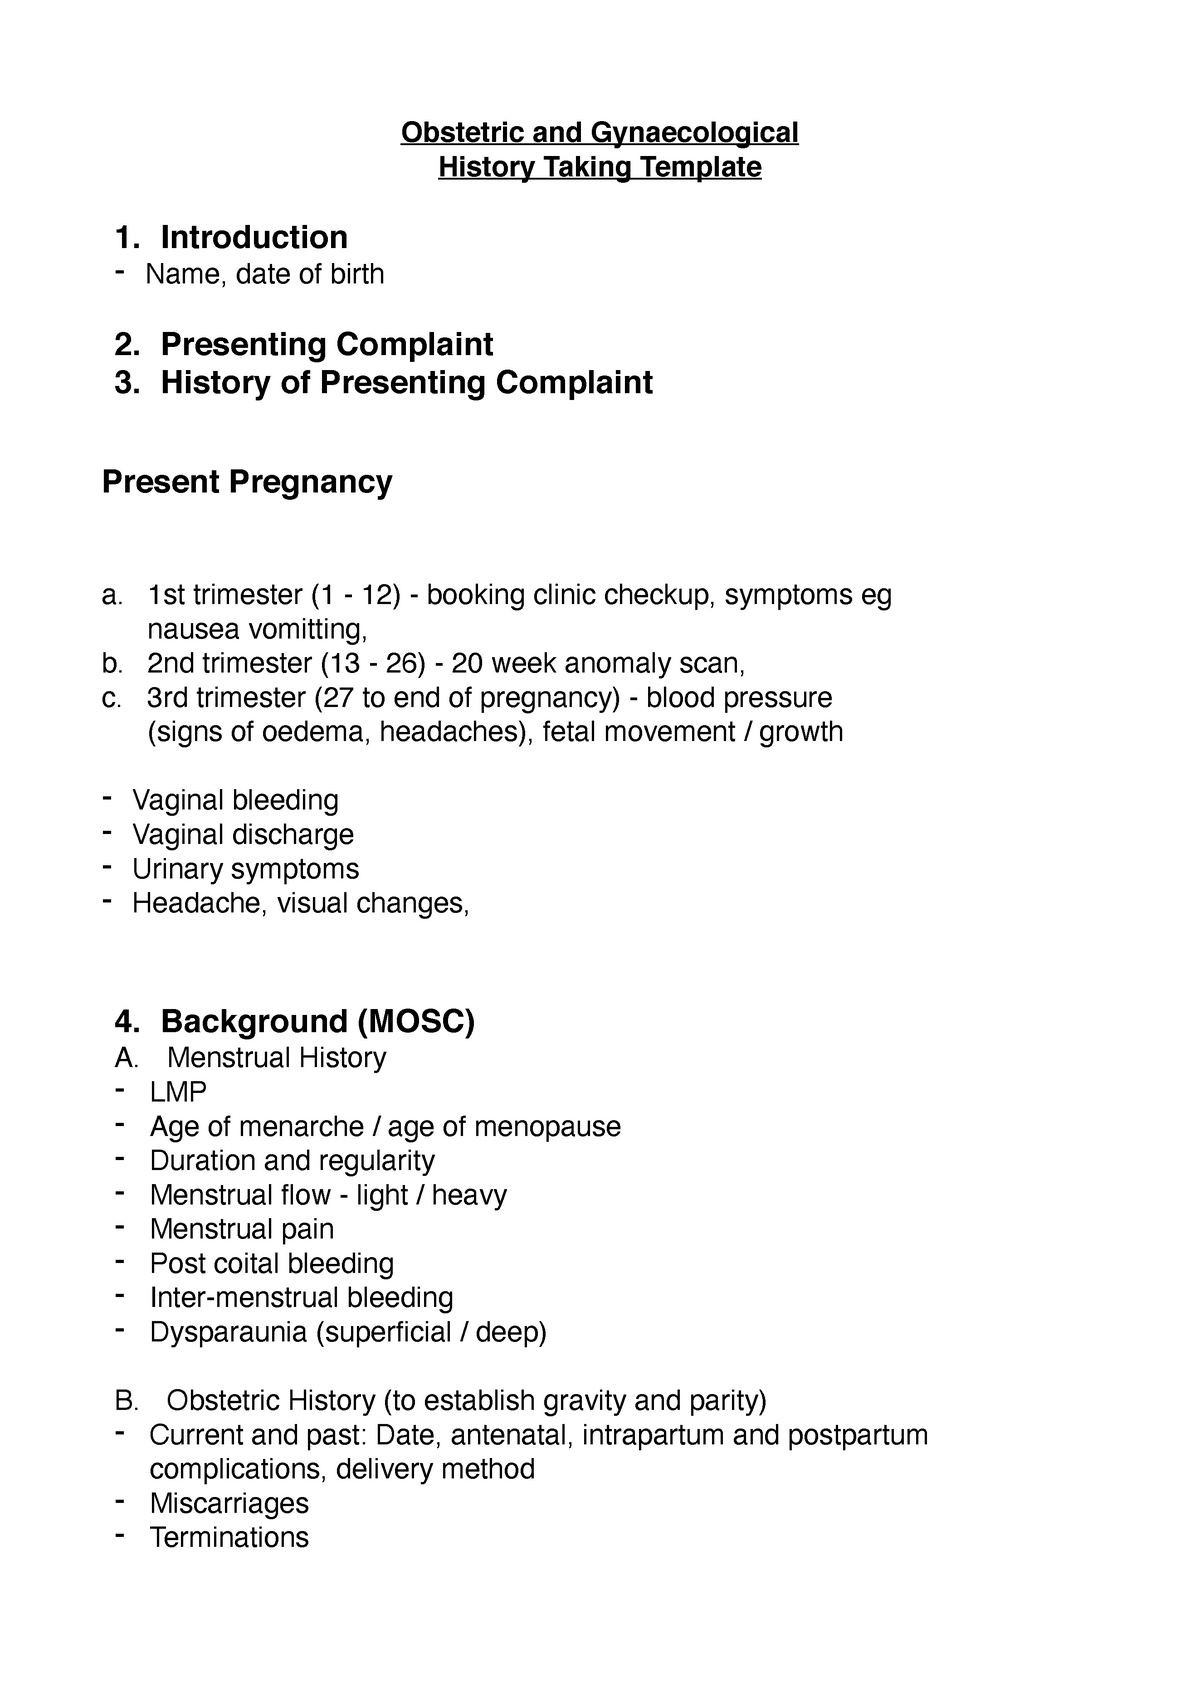 Obstetrics and Gynaecology Hx Taking Notes Obstetric and